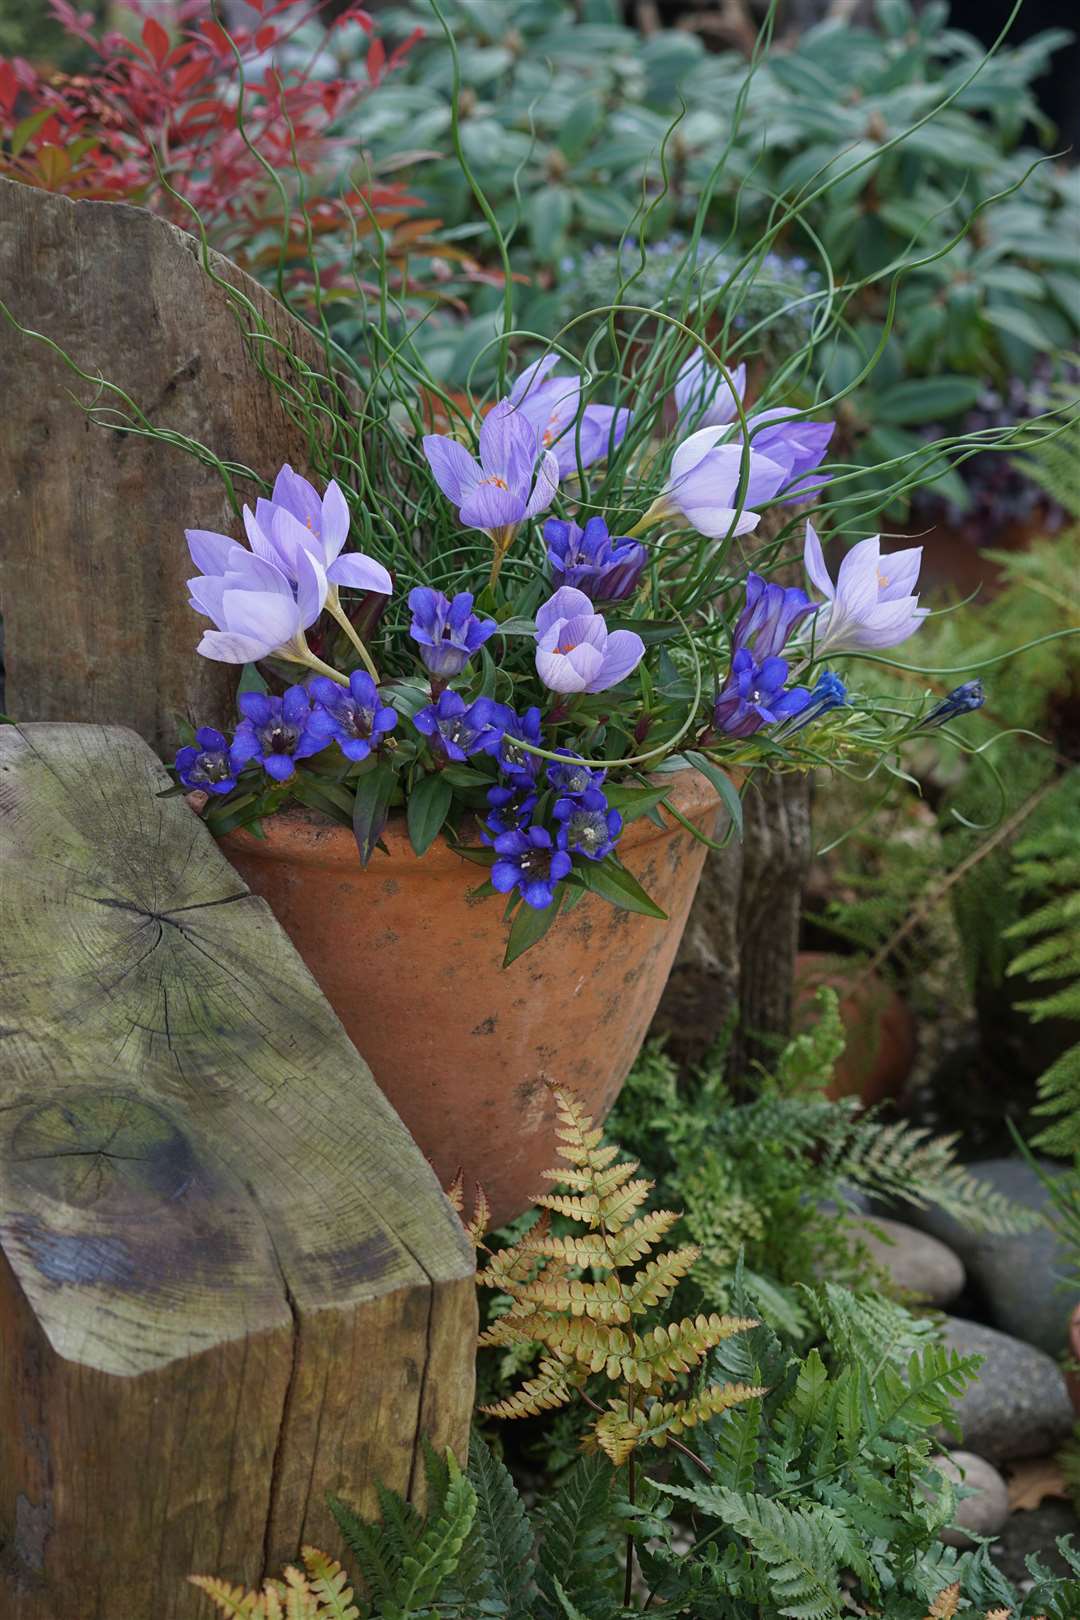 Autumn flowering crocus and gentians in a pot. Picture: Tom Harris/PA